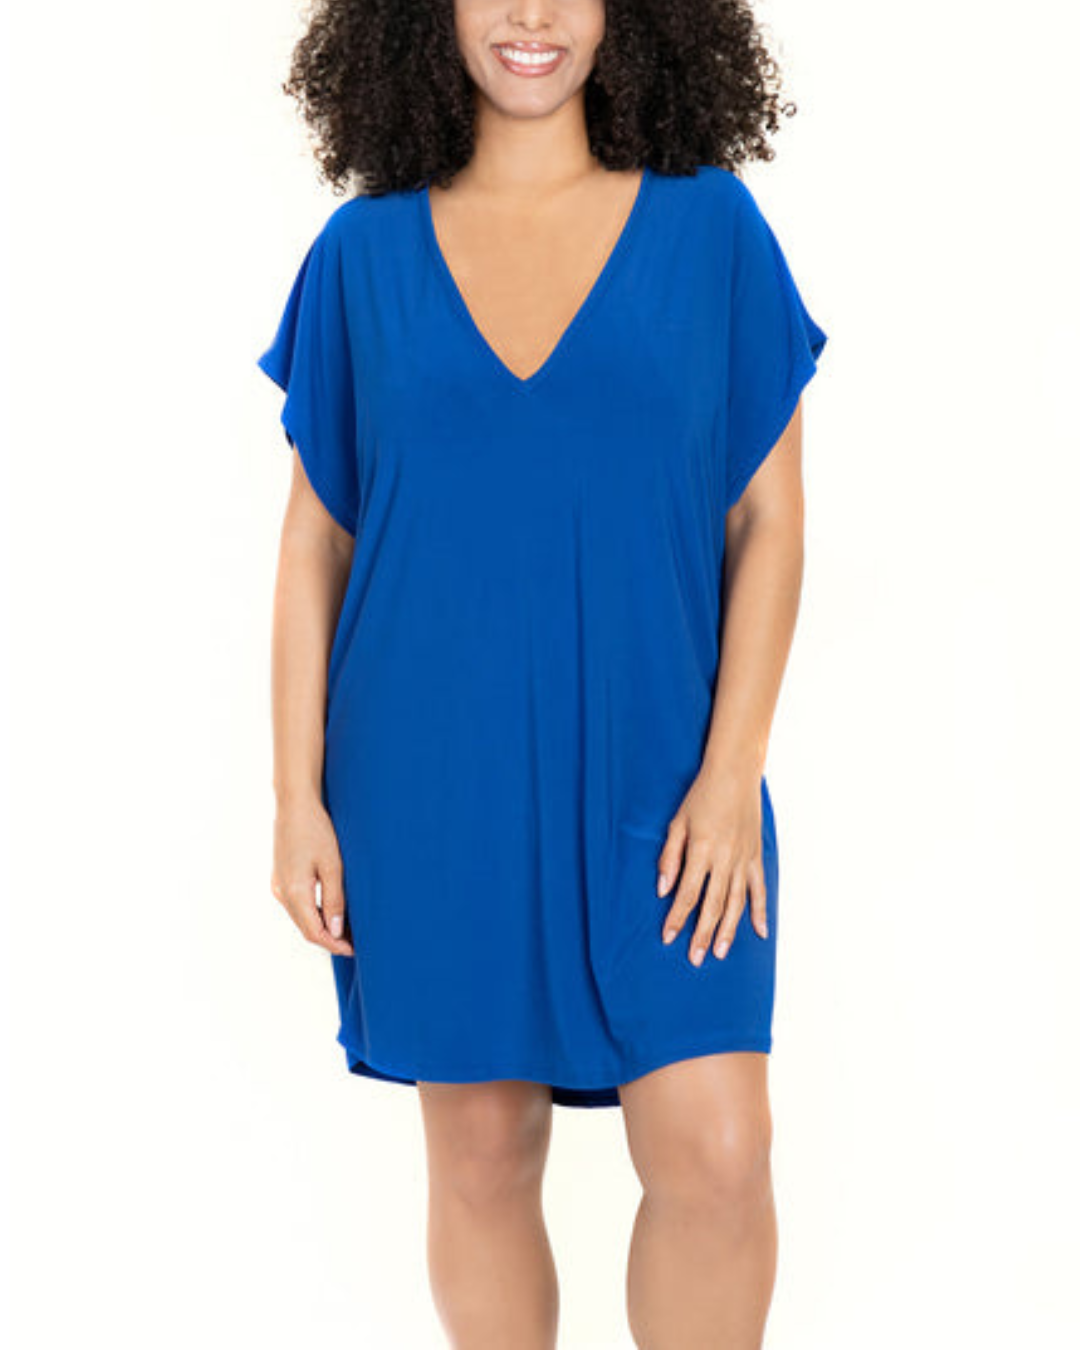 Model wearing a v neck tunic with a cut out back detail in royal blue